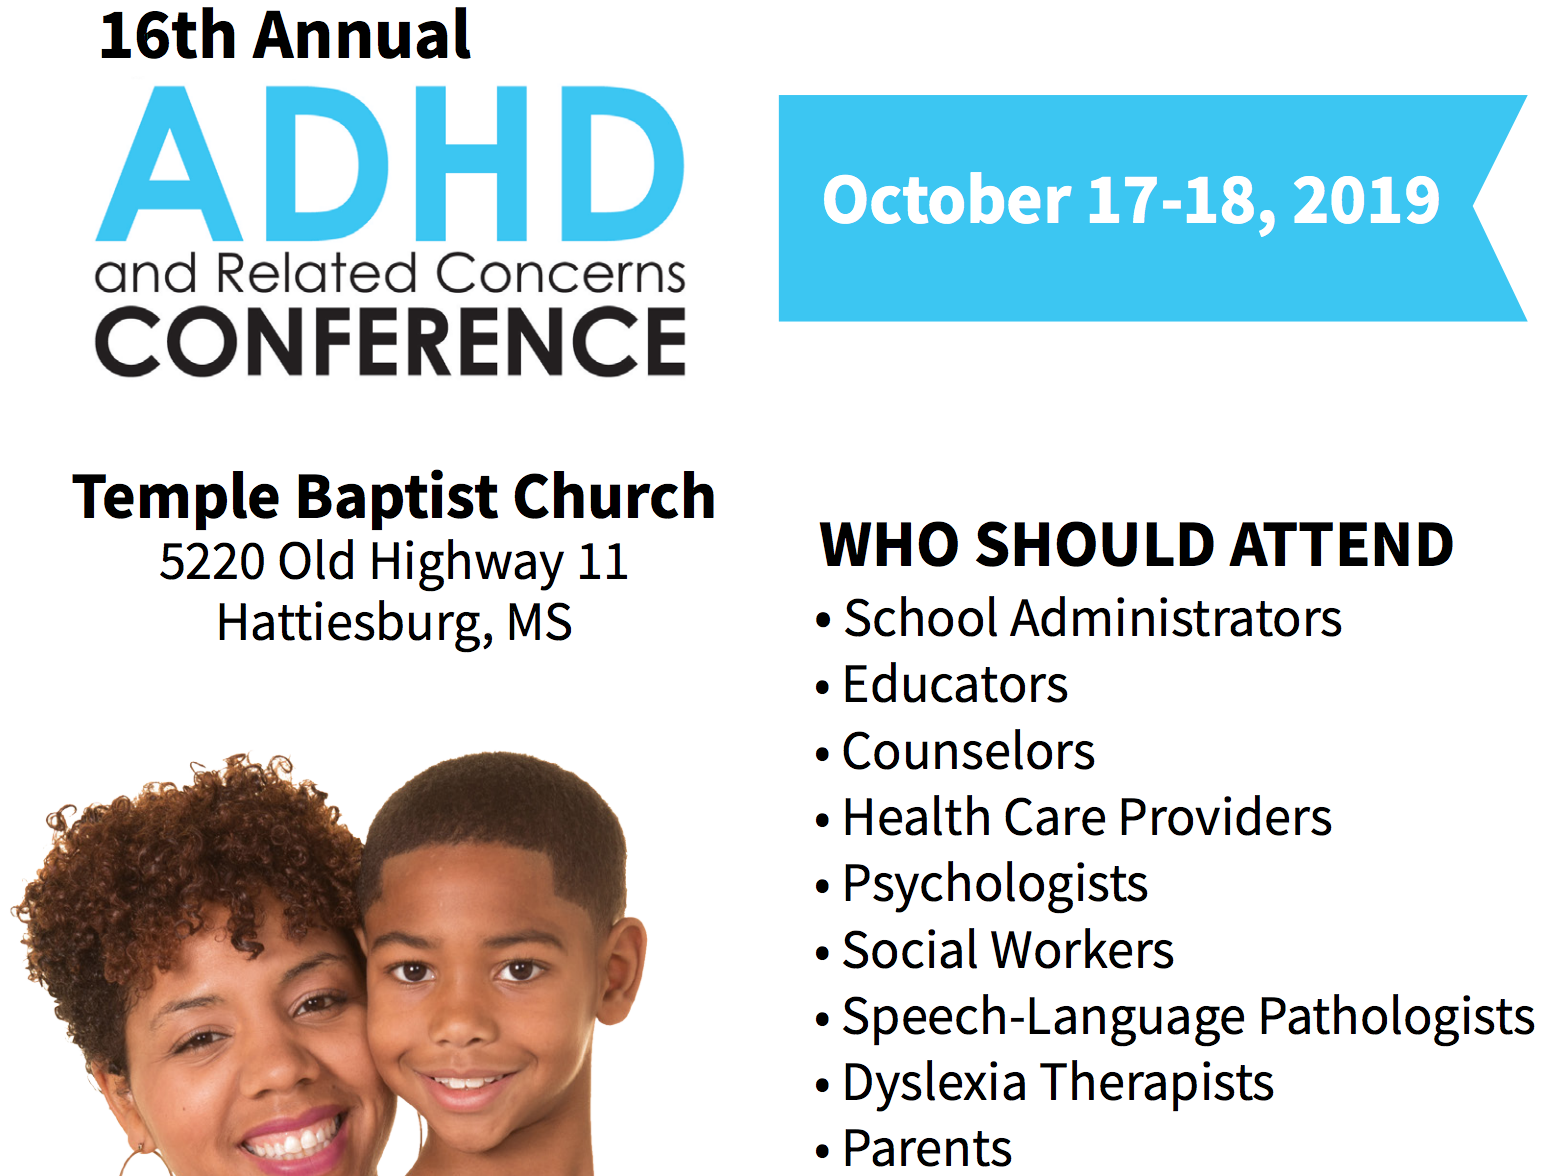 ADHD and Related Concerns Conference